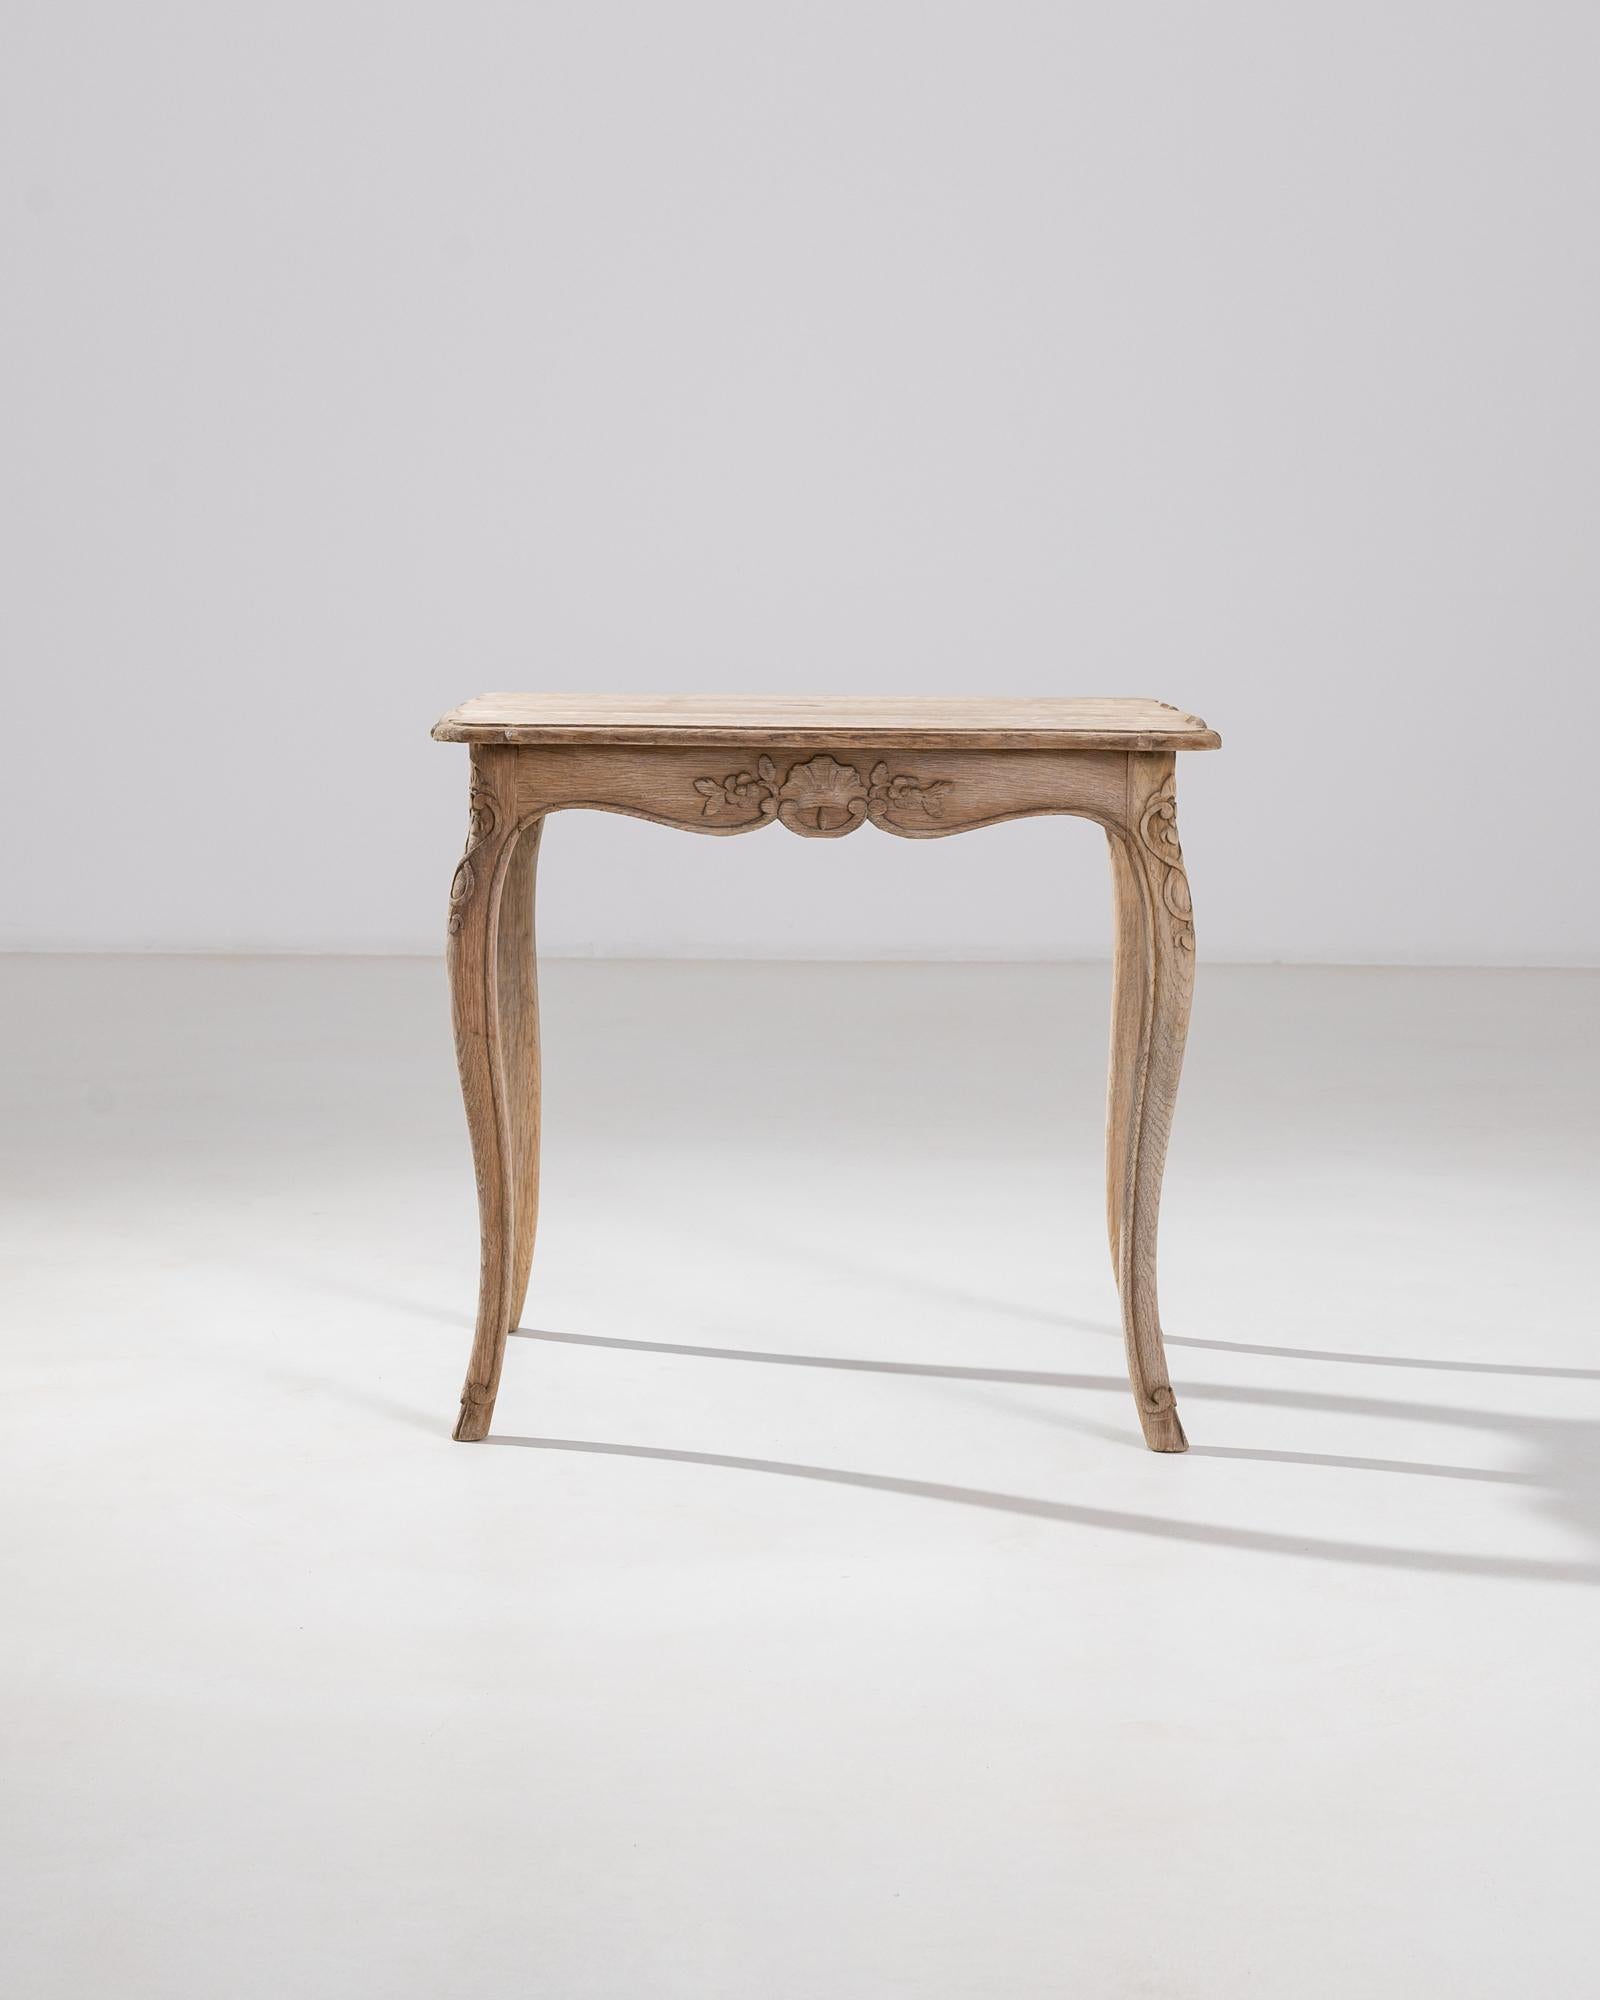 Discover the charm of a bygone era with this 19th Century French Bleached Oak Side Table. Each glance reveals the table's rich history and the artisanship of its creators. The beautifully weathered oak surface boasts a soft, sun-kissed patina that